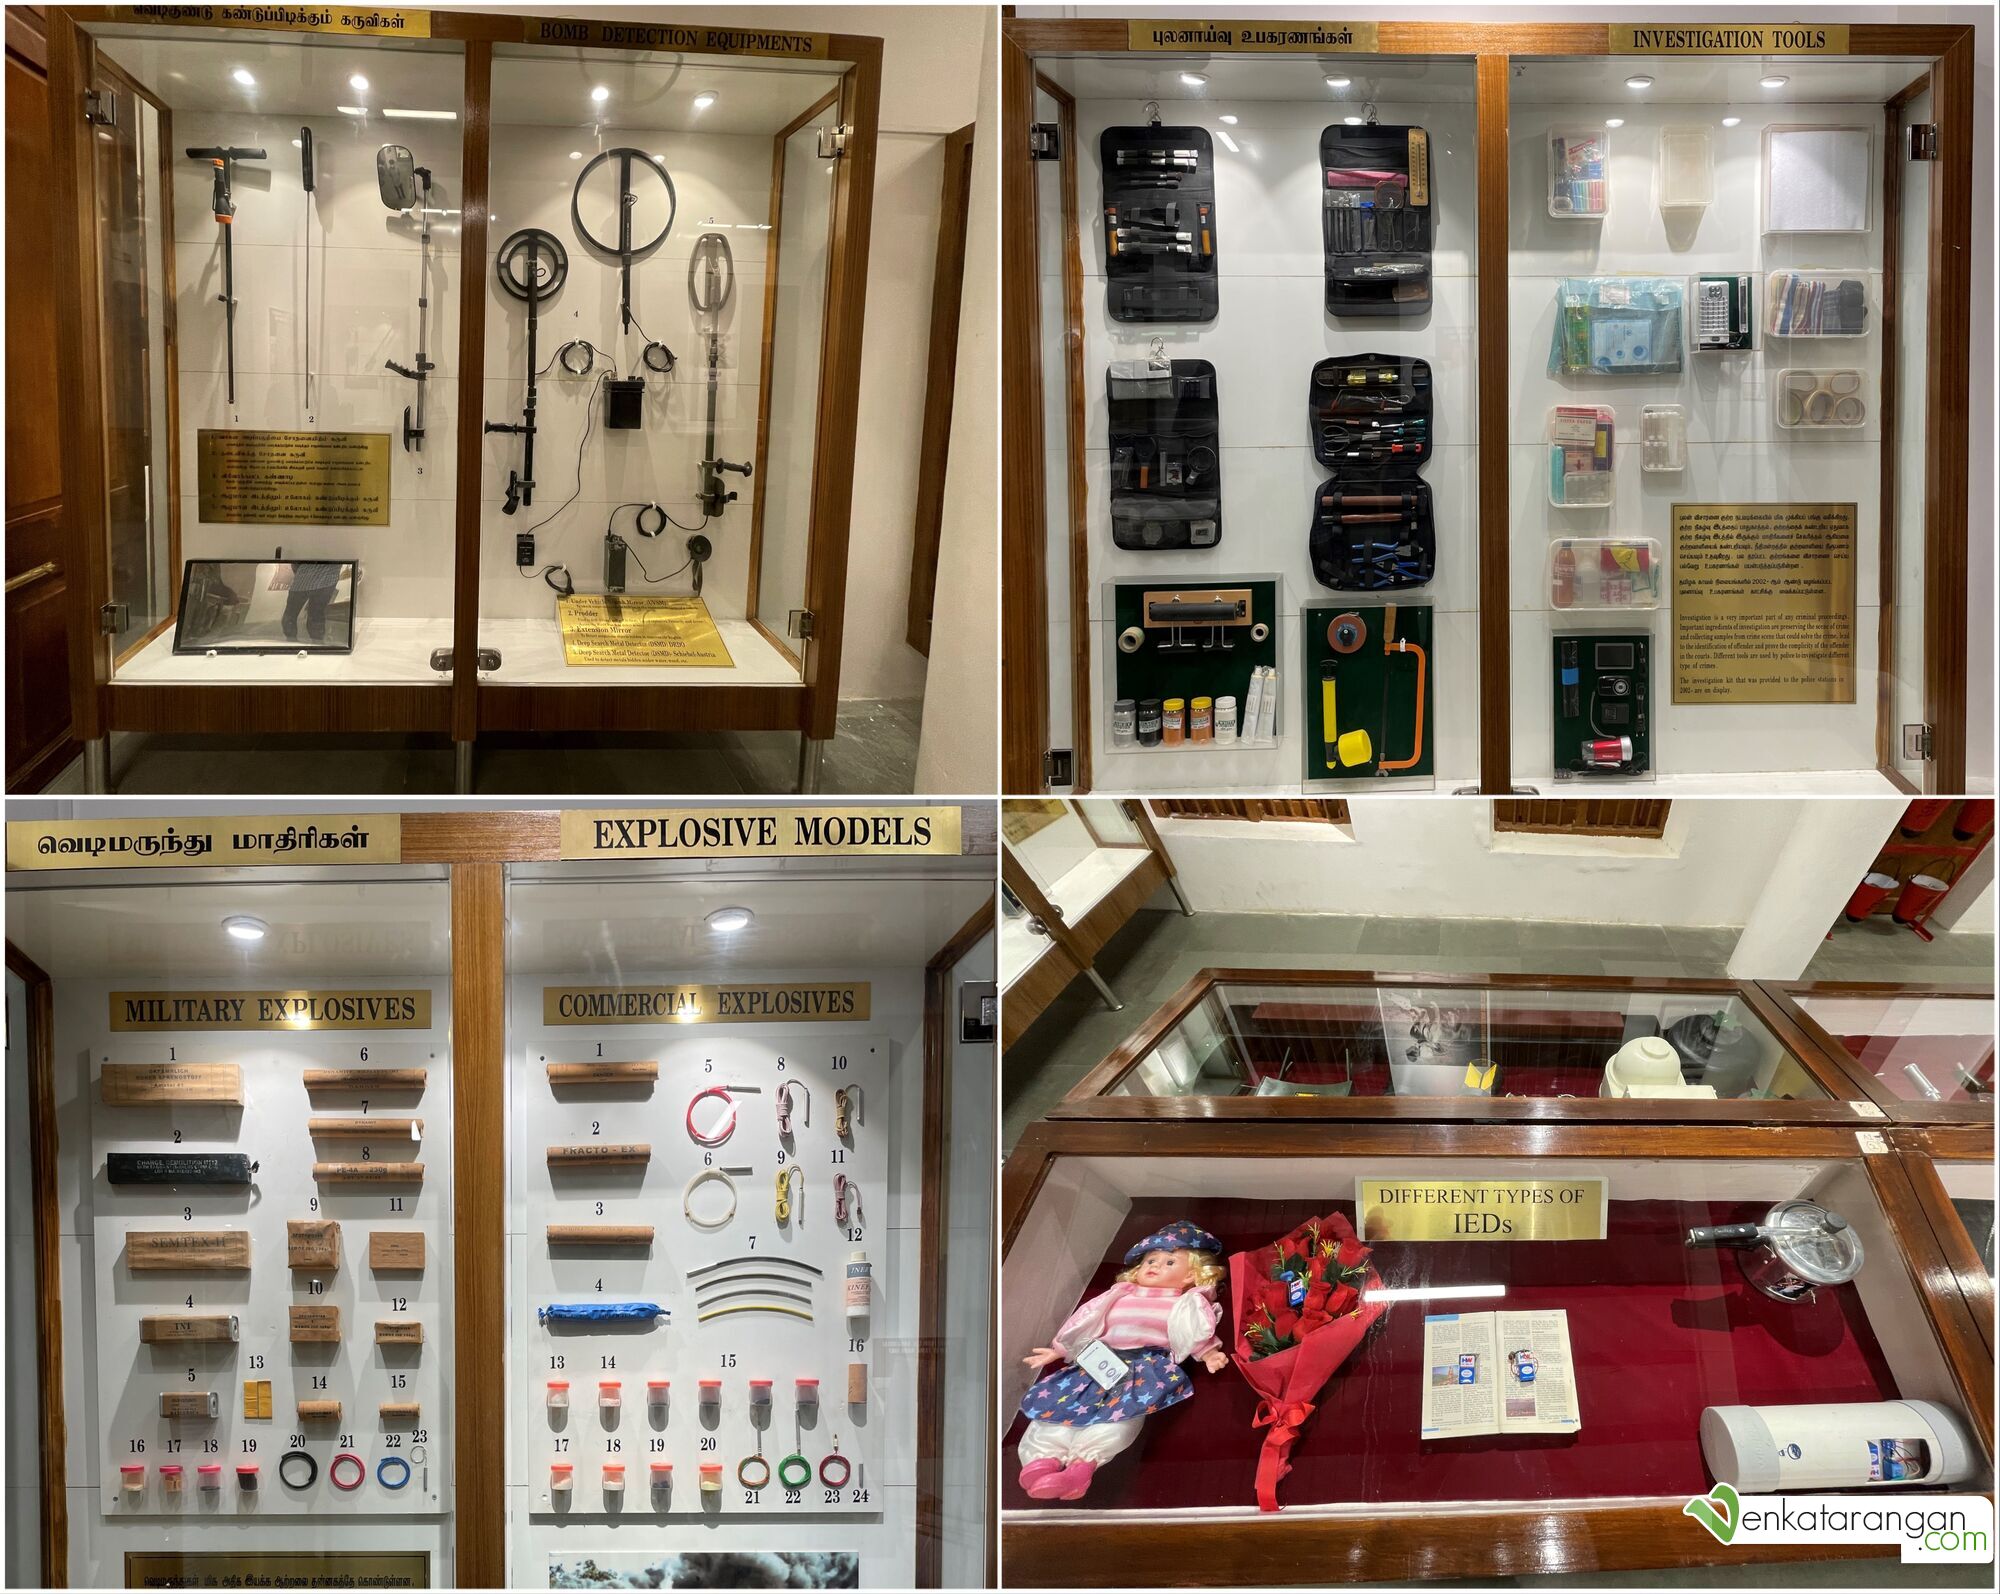 Explosive Models, Different types of IEDs, Investigation Tools and more on display at the Tamil Nadu Police Museum, Egmore, Chennai